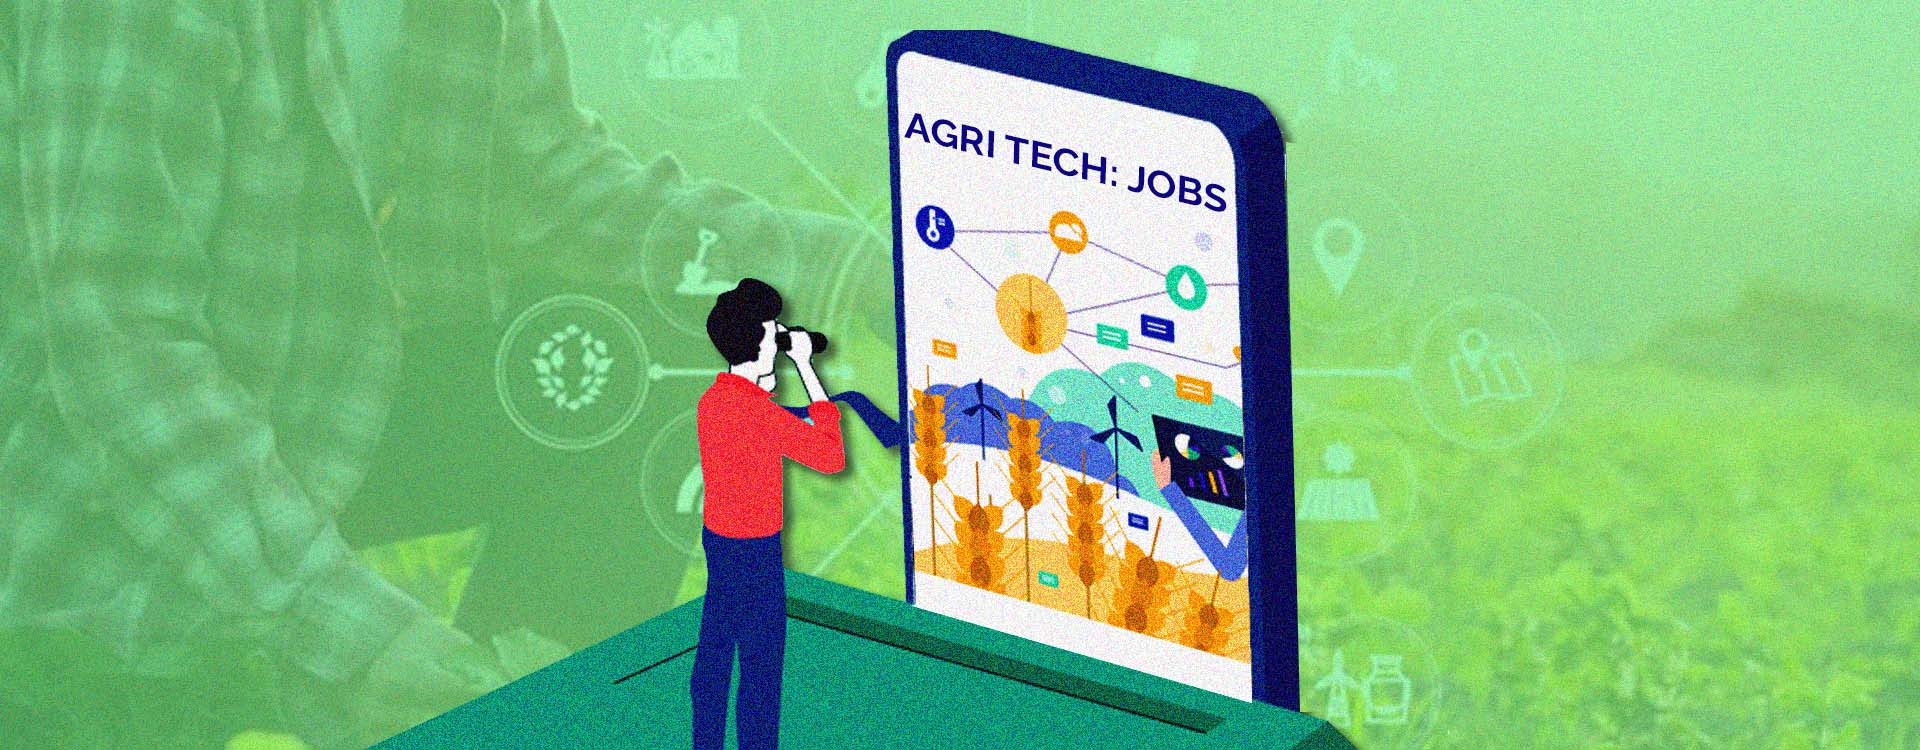 AgriTech: The latest job market trends for start-ups in 2021.